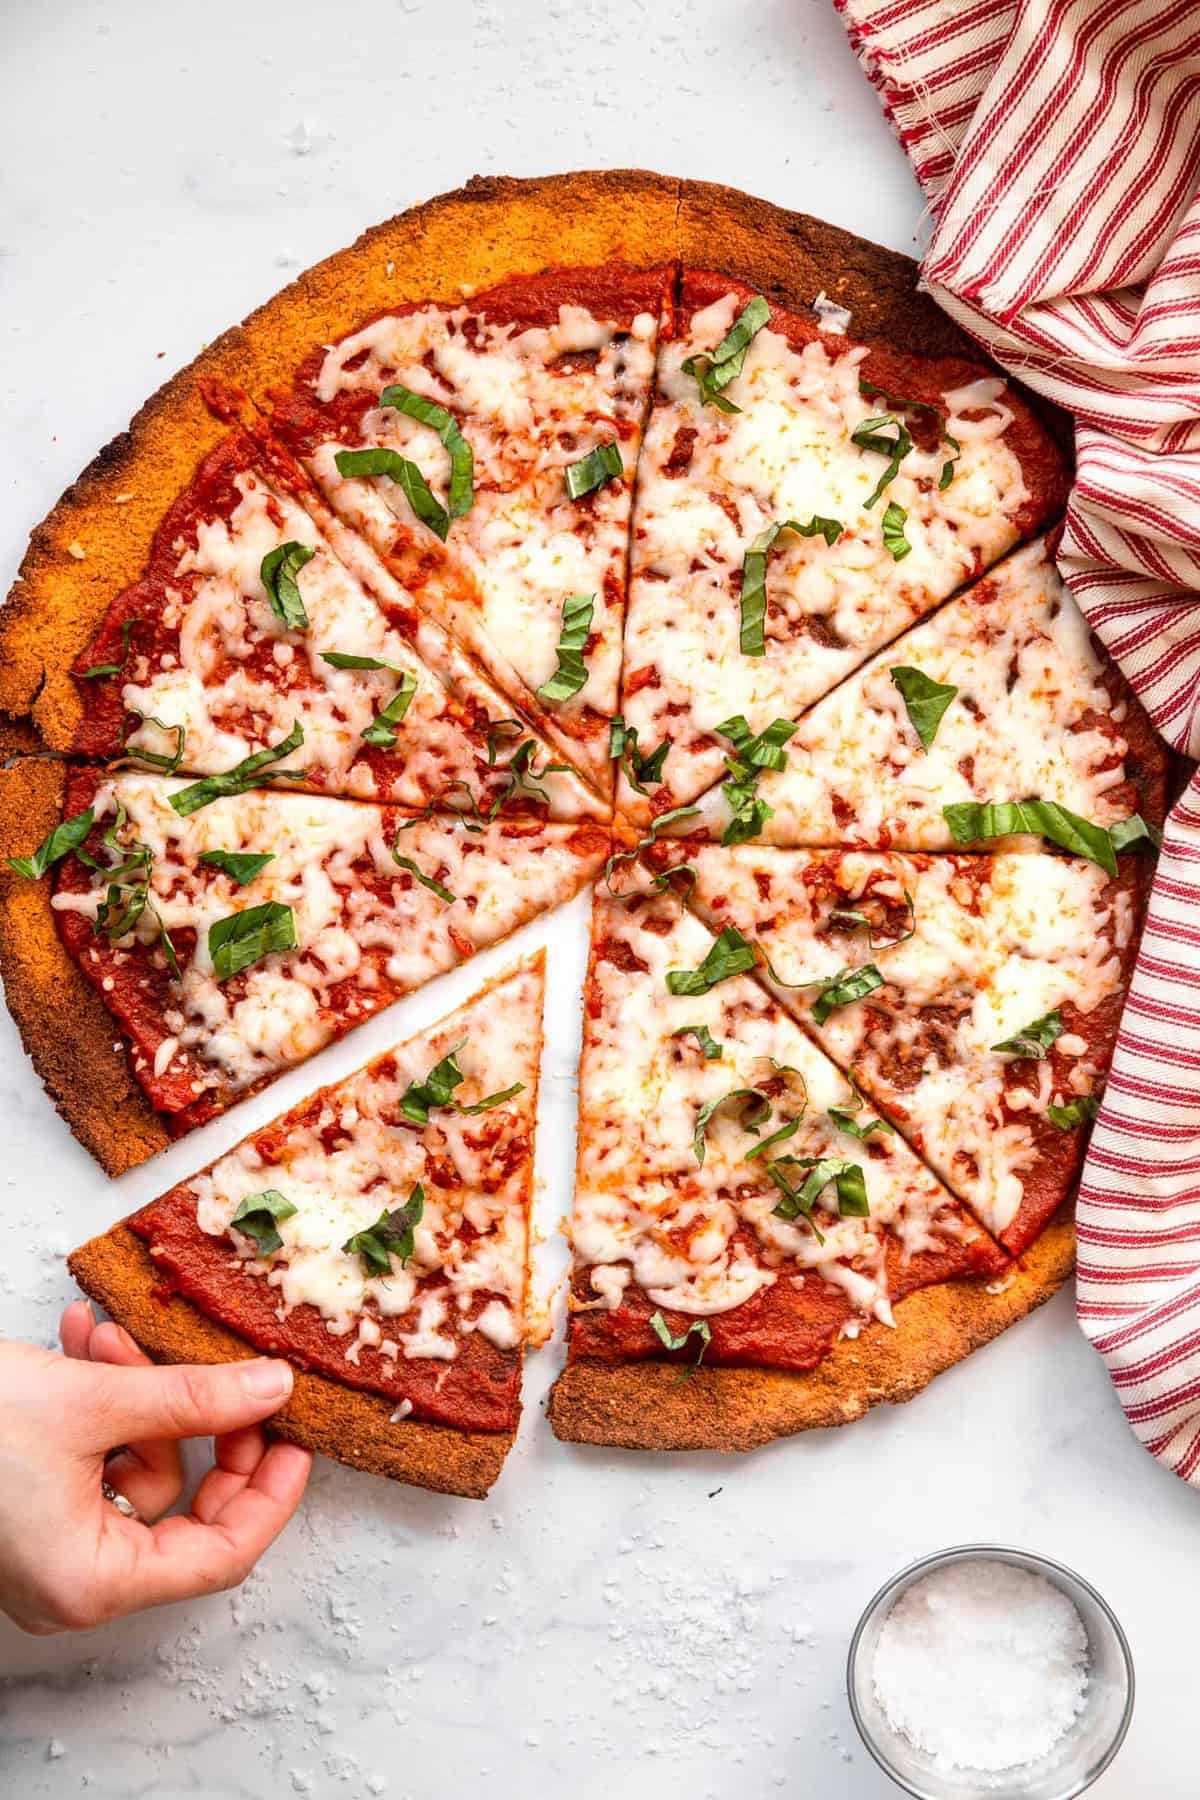 Sweet potato pizza served with cheese, sauce, and basil